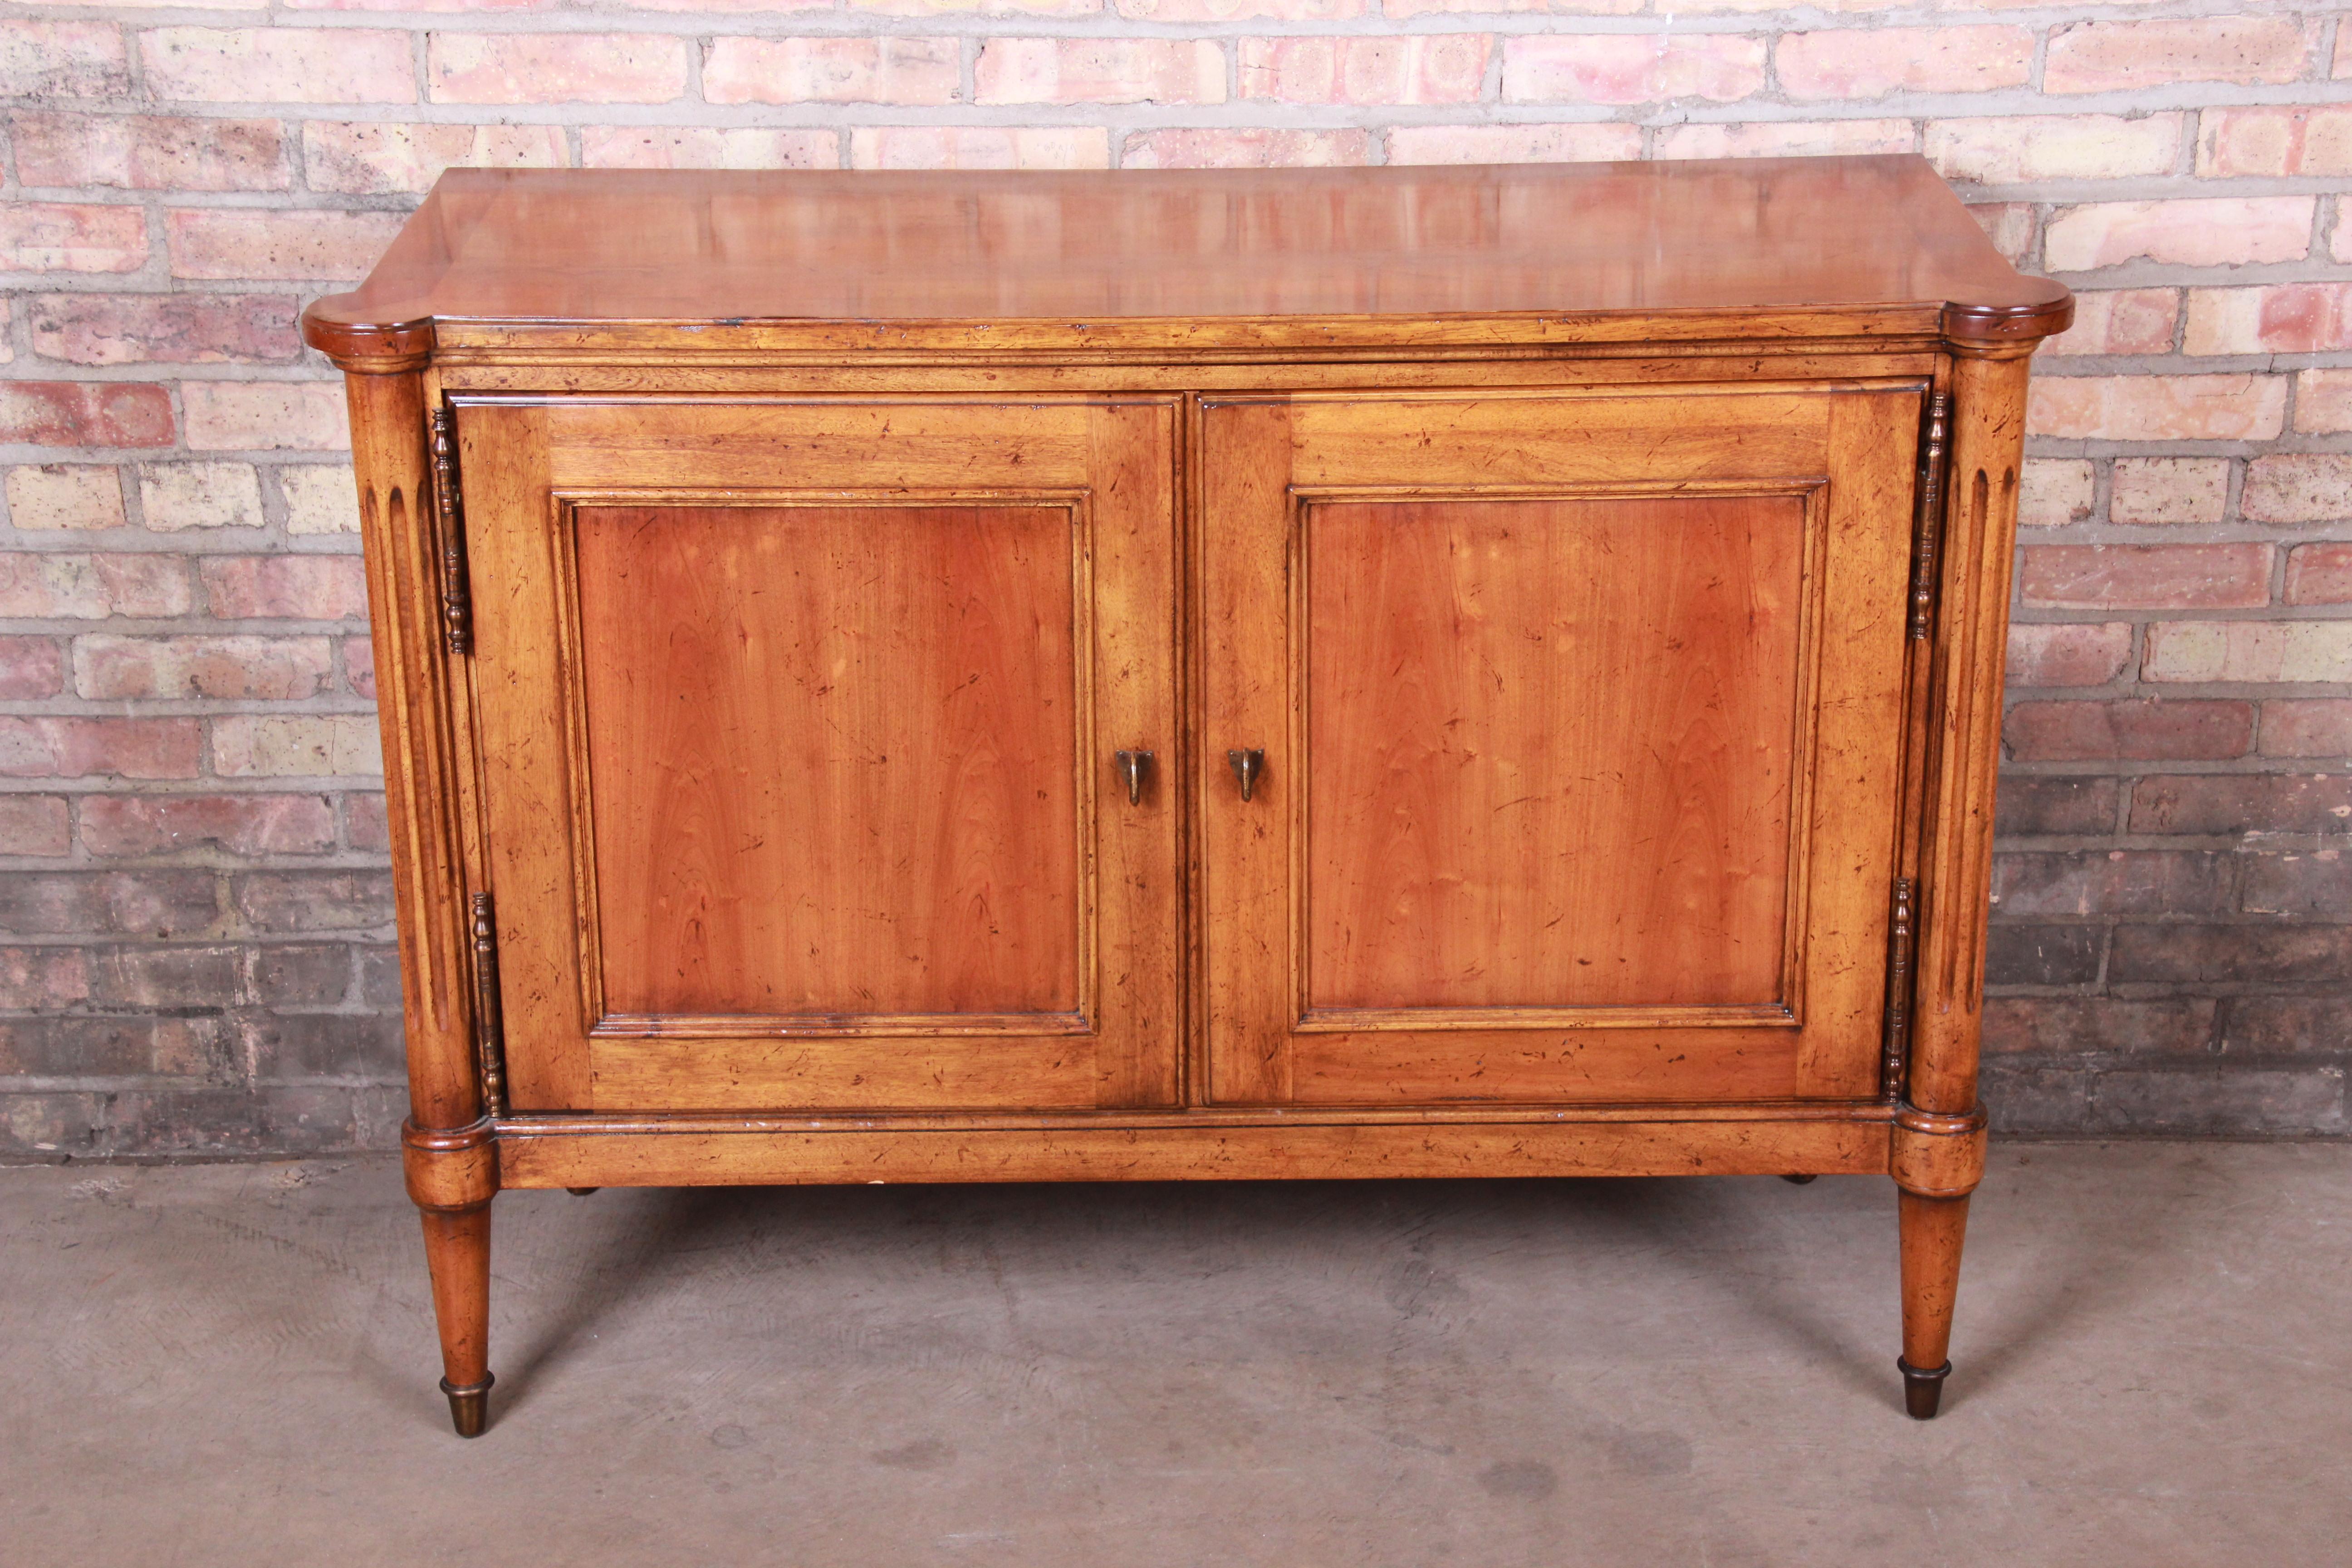 A gorgeous French Regency Louis XVI style credenza or bar cabinet

By Baker Furniture 